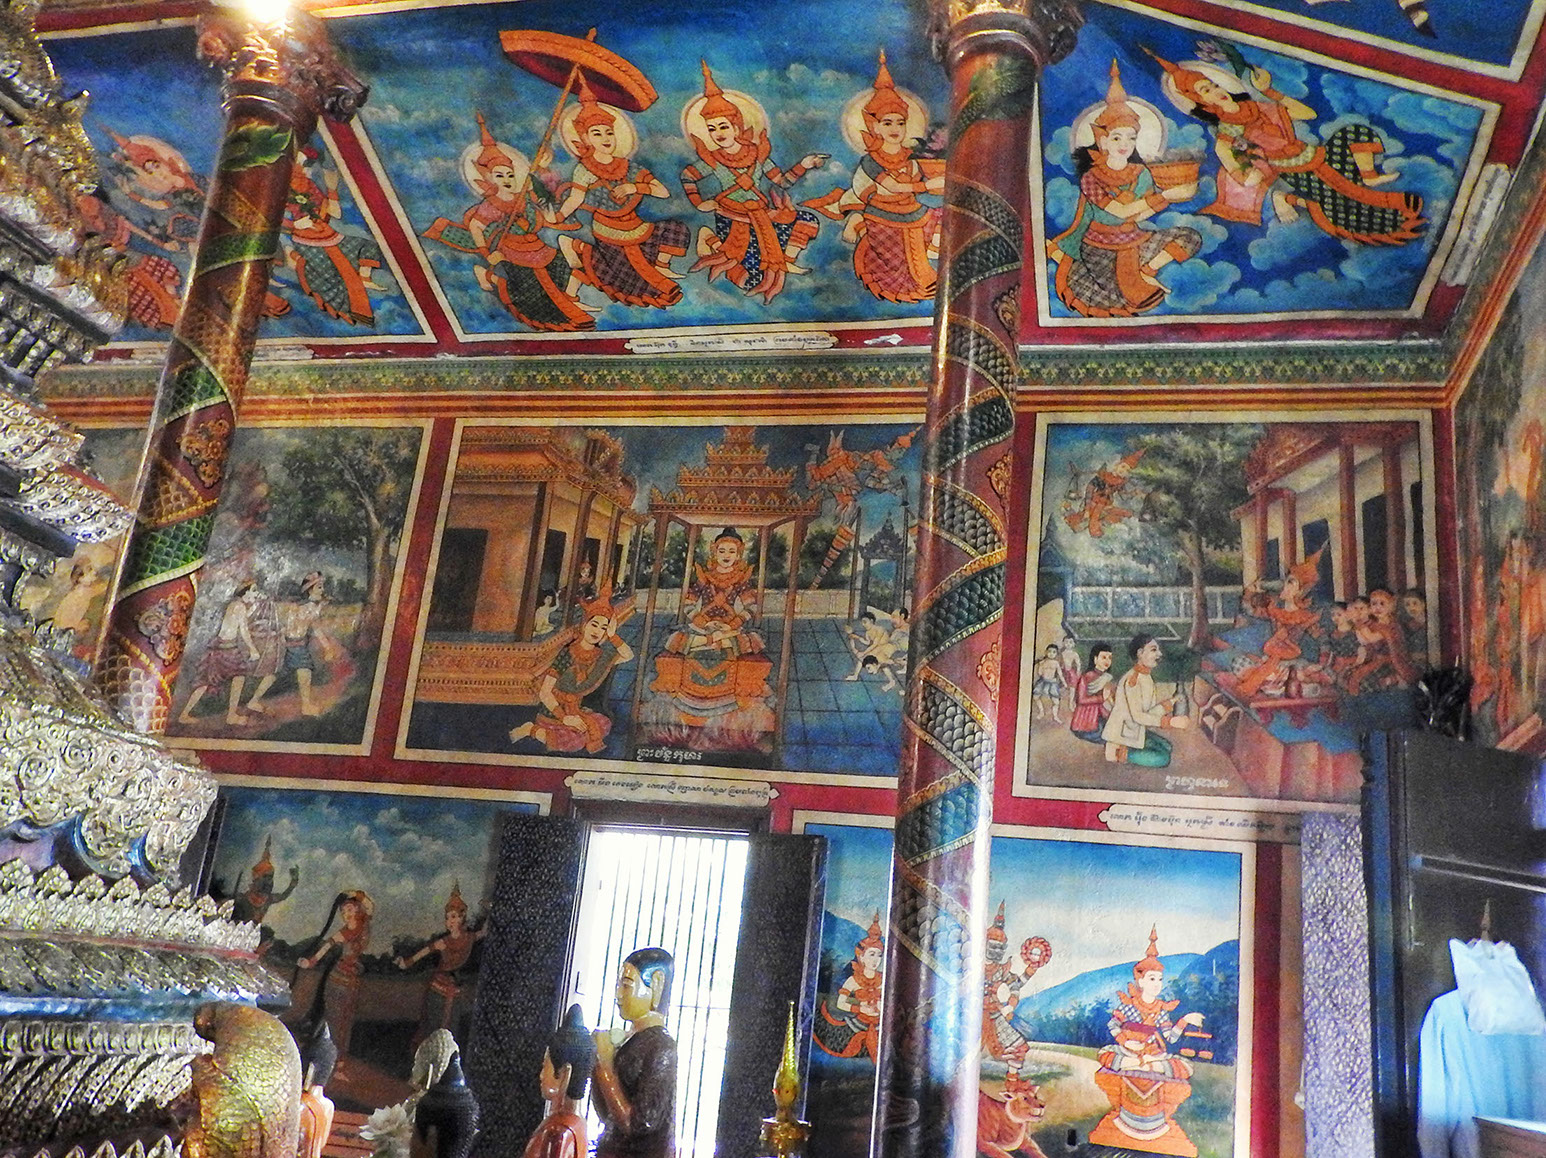 The ancient paintings on the ceiling of Wat Phnom represent Buddha tales.